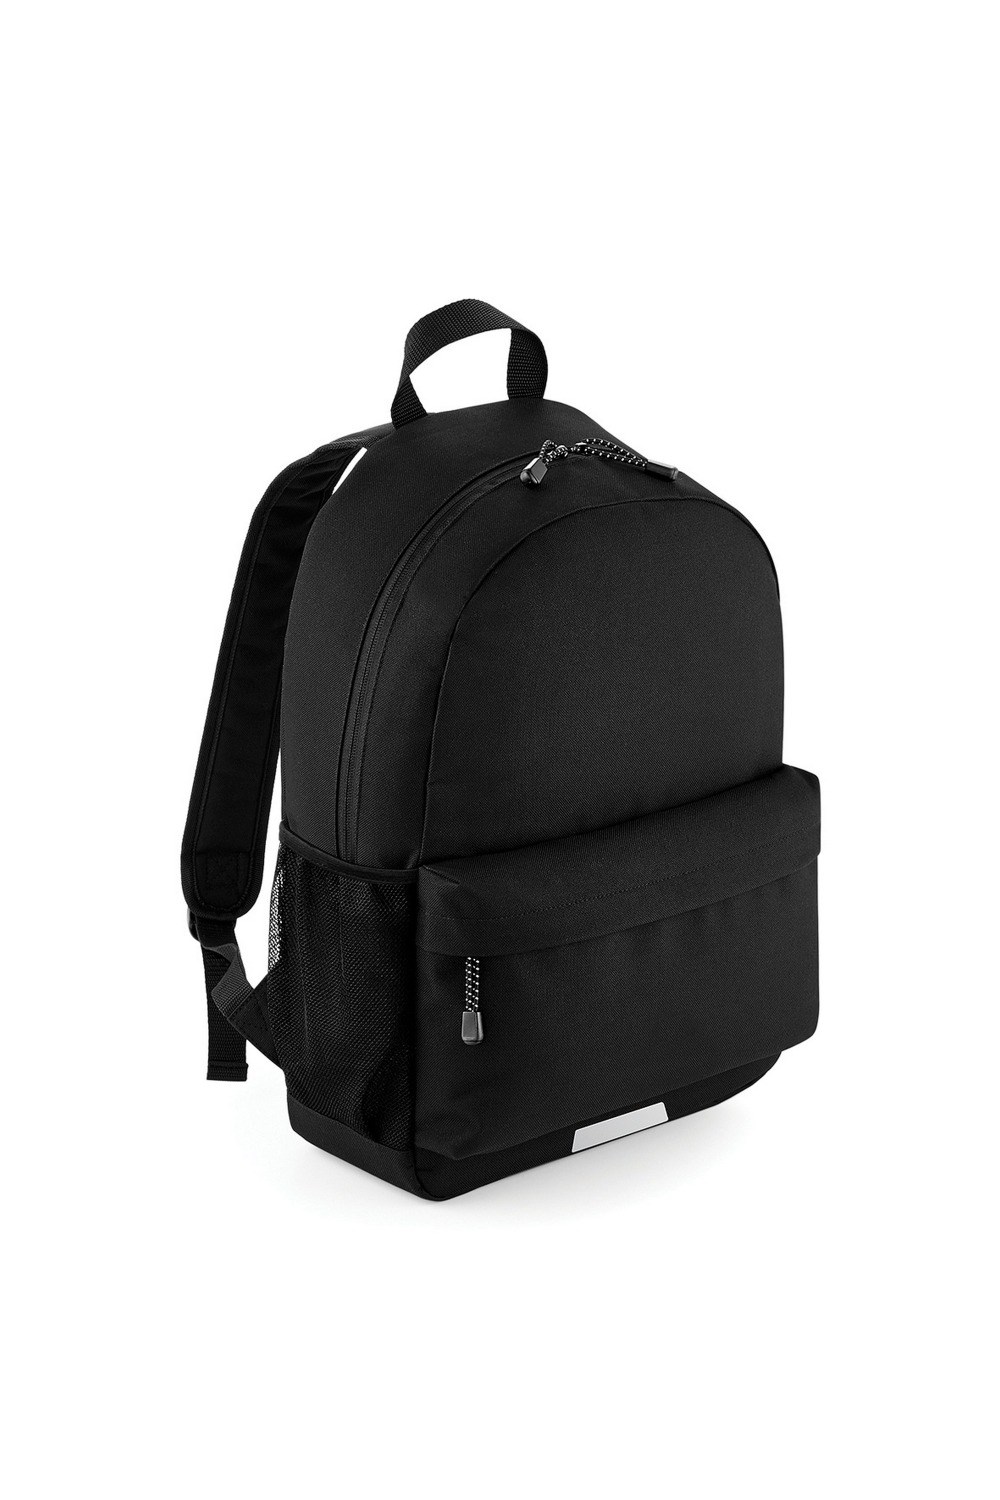 Academy Classic Backpack 18L -